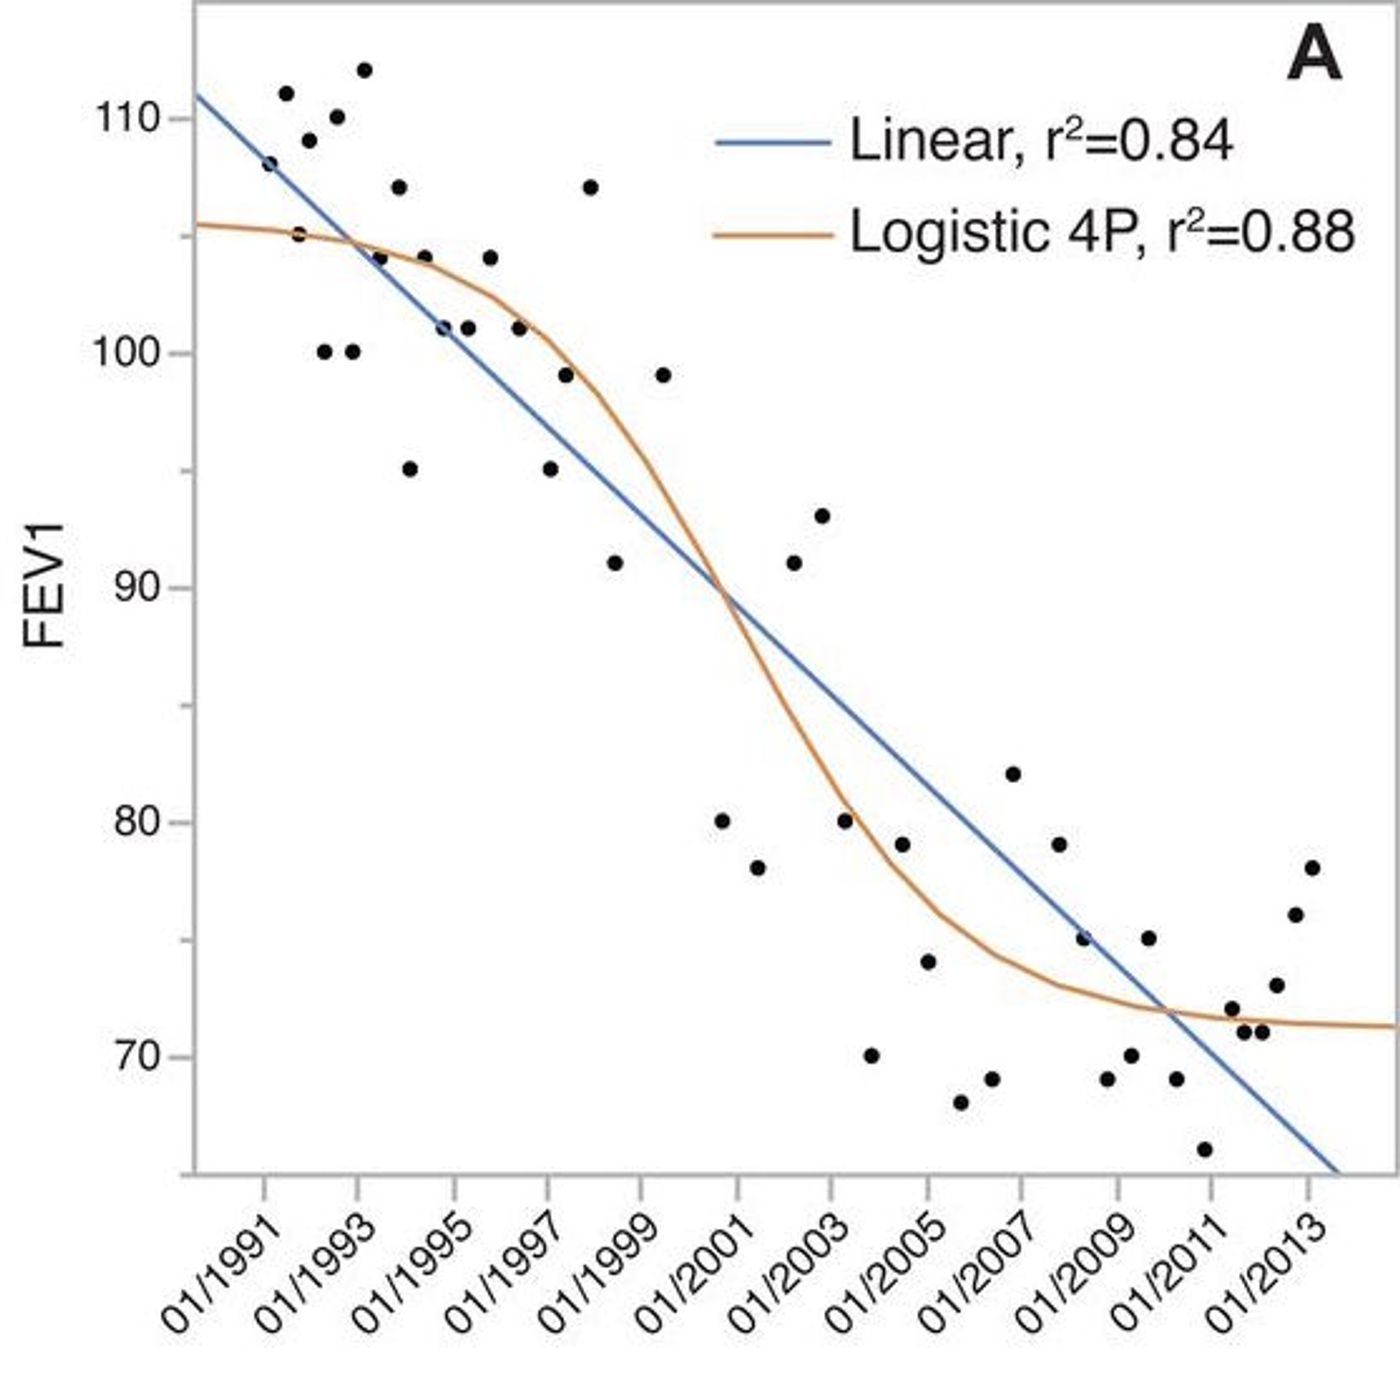 Lung function decline correlates with evolution of clade C3. Forced expiratory volume in 1s (FEV1) as predicted percentages. 